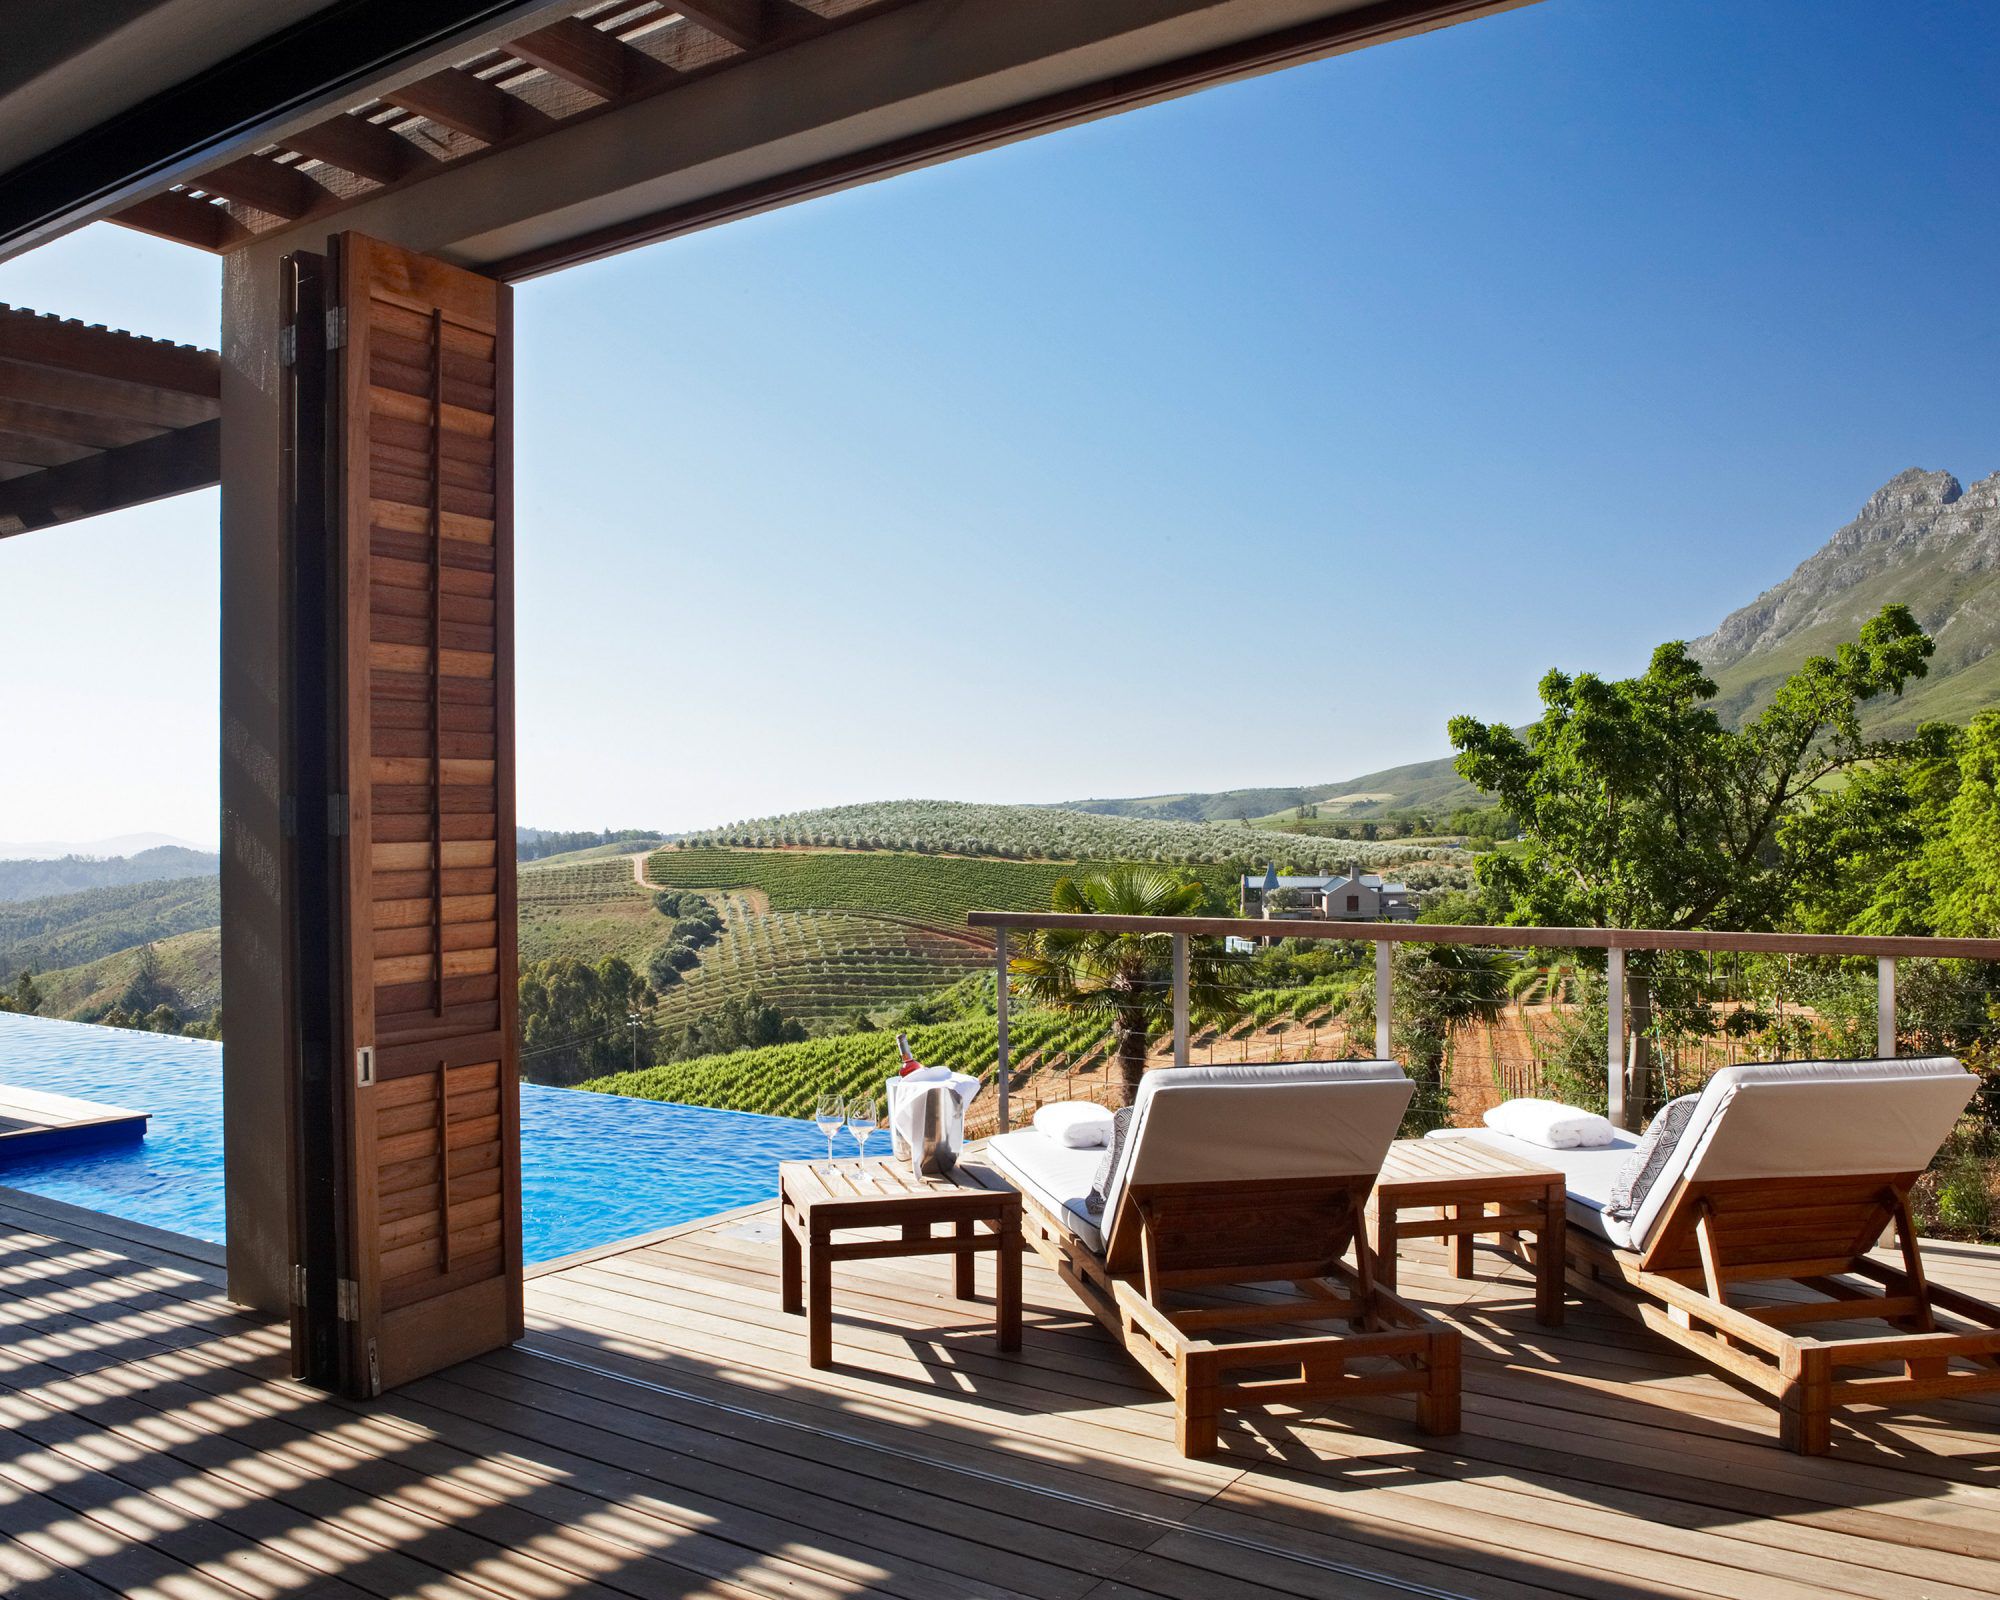 view from one of the lodges in the Delaire Graff Estate in South Africa 